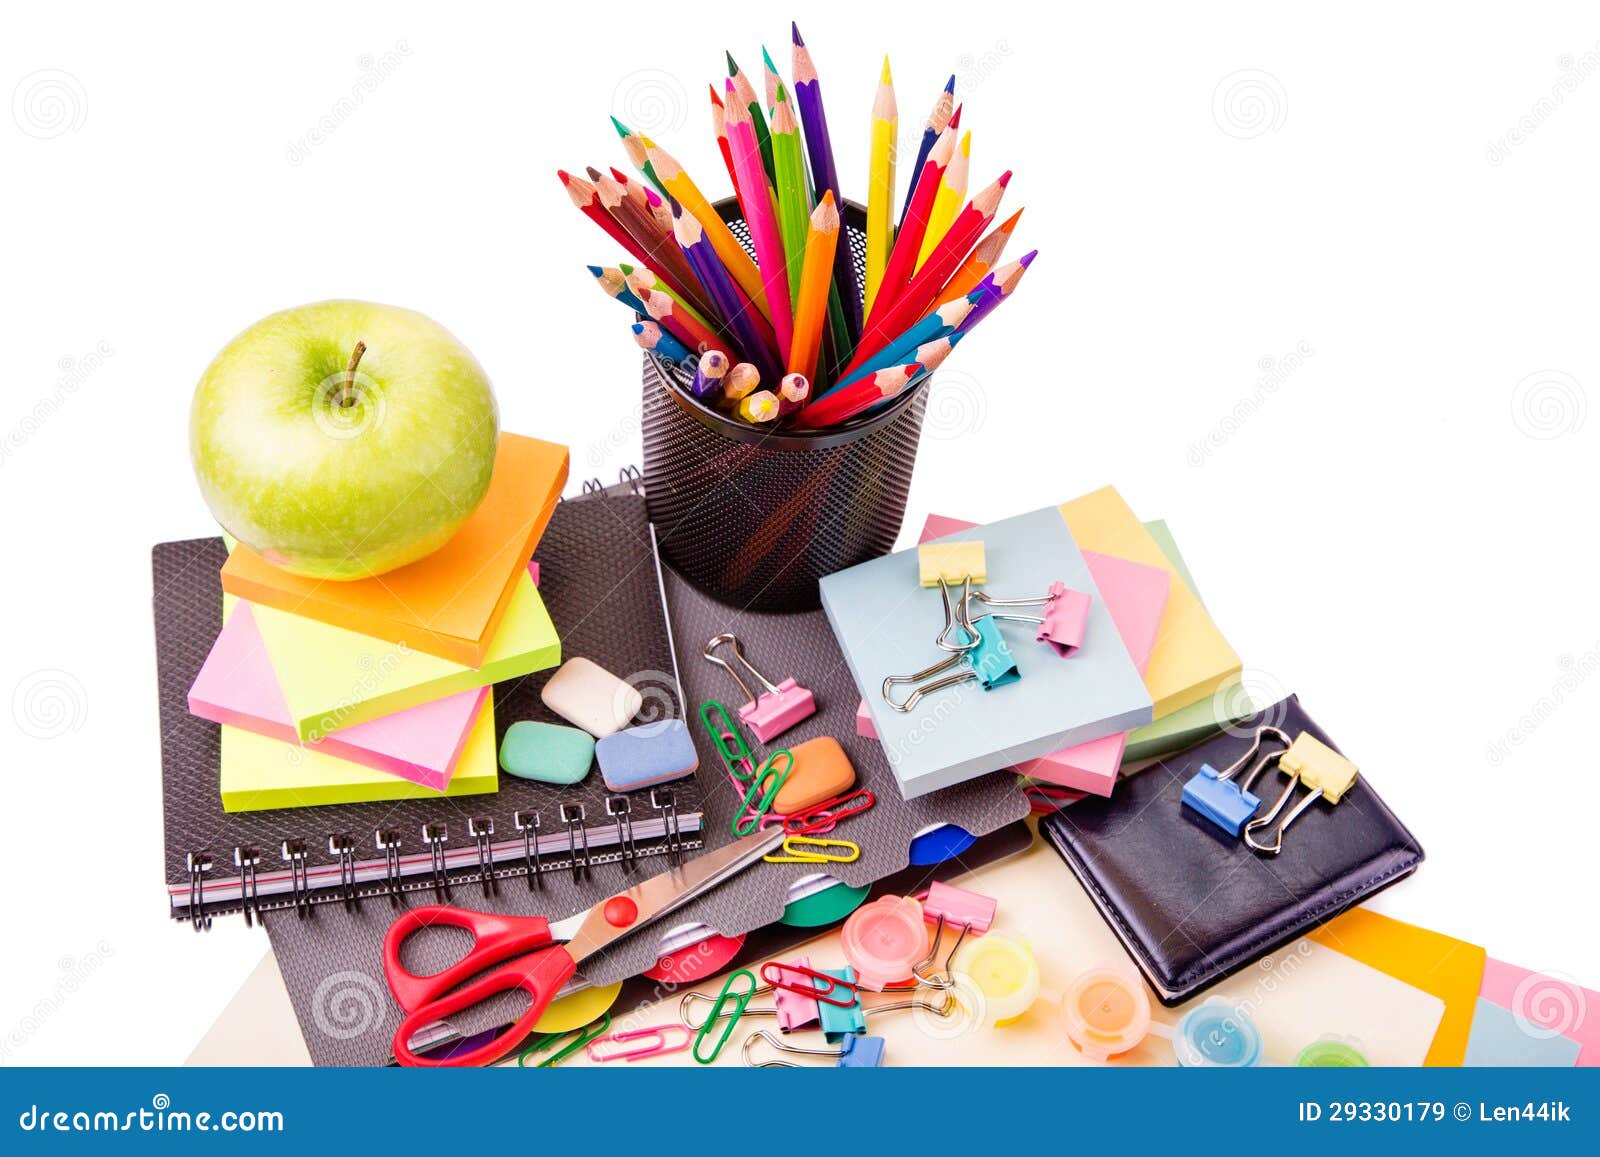 office clipart back to school - photo #20